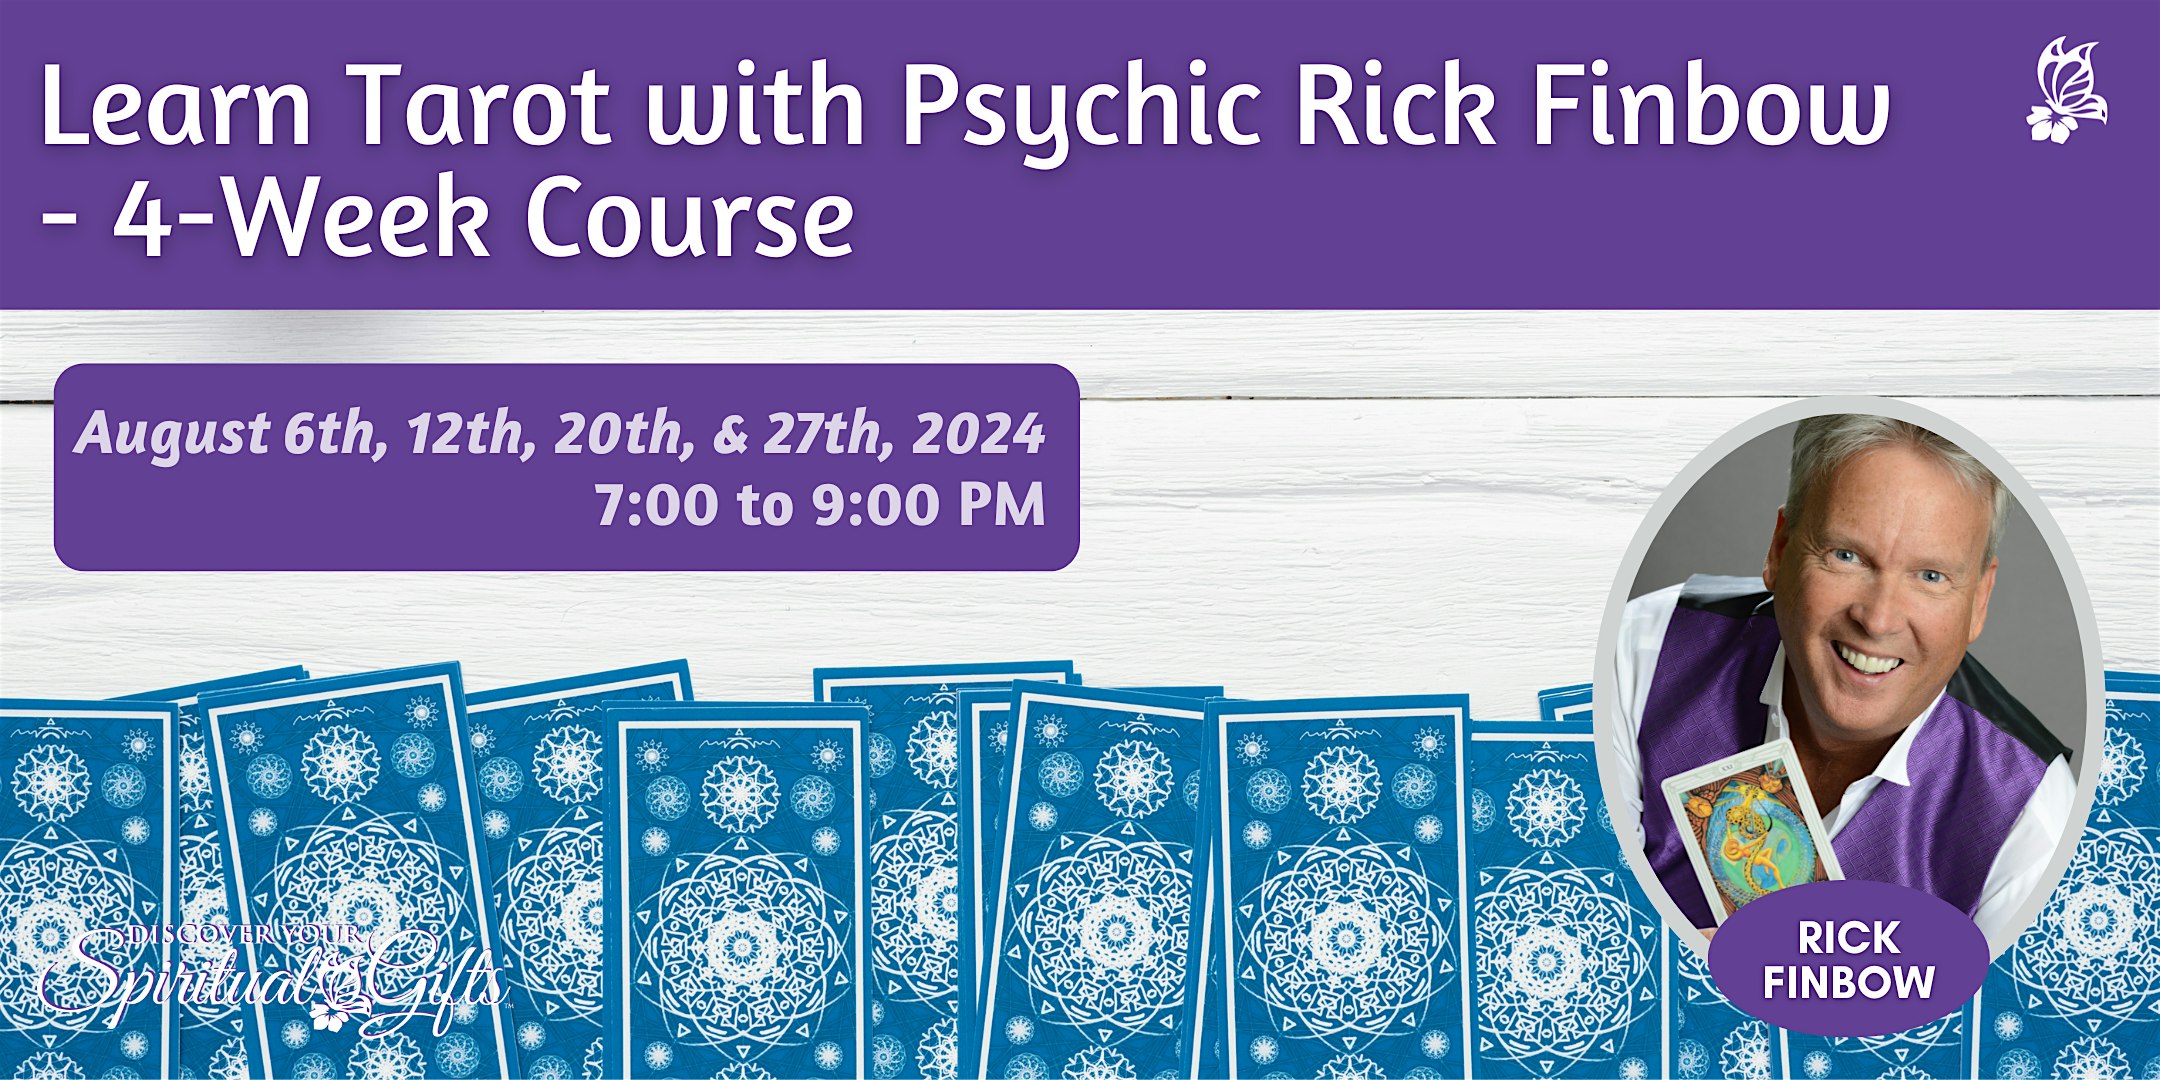 Learn Tarot with Psychic Rick Finbow - 4-Week Course